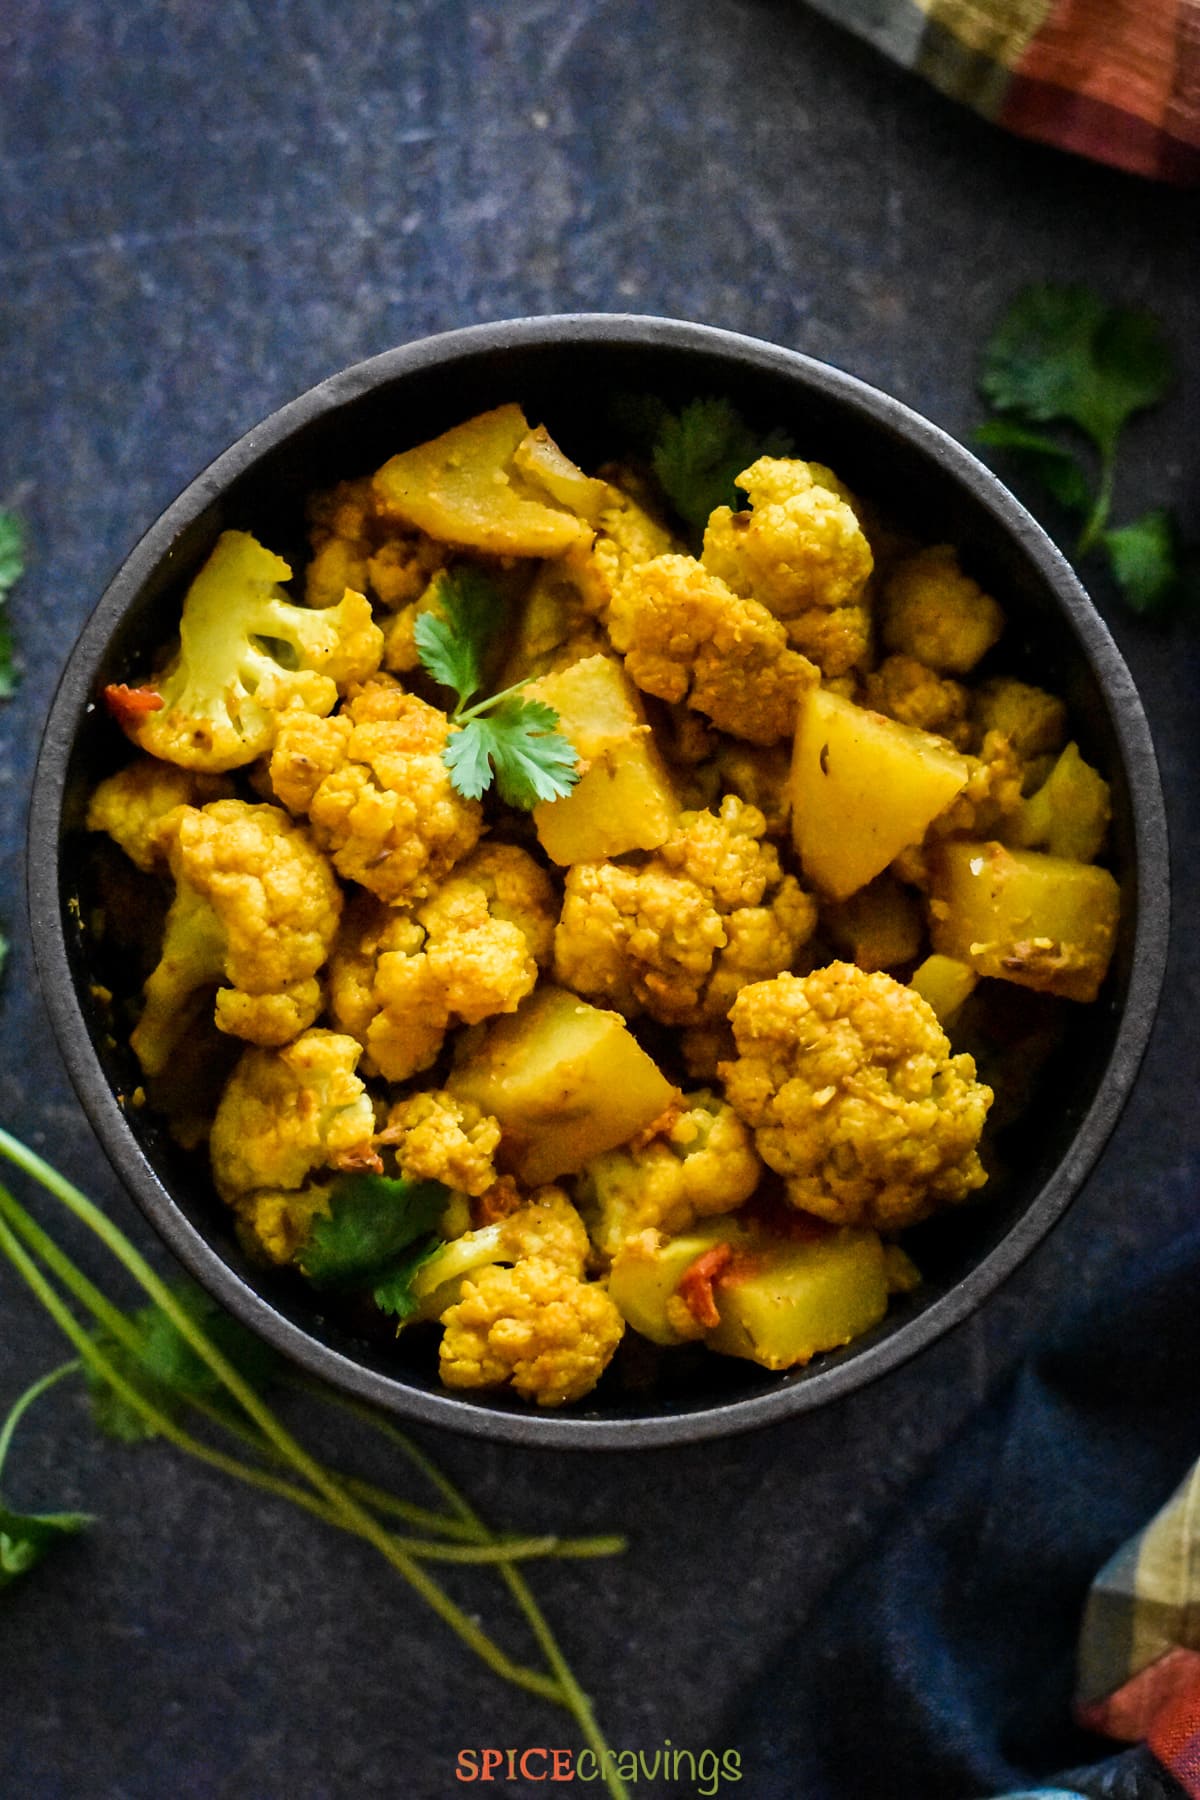 Instant pot Aloo Gobi, spiced potato and cauliflower seasoned with Indian spices